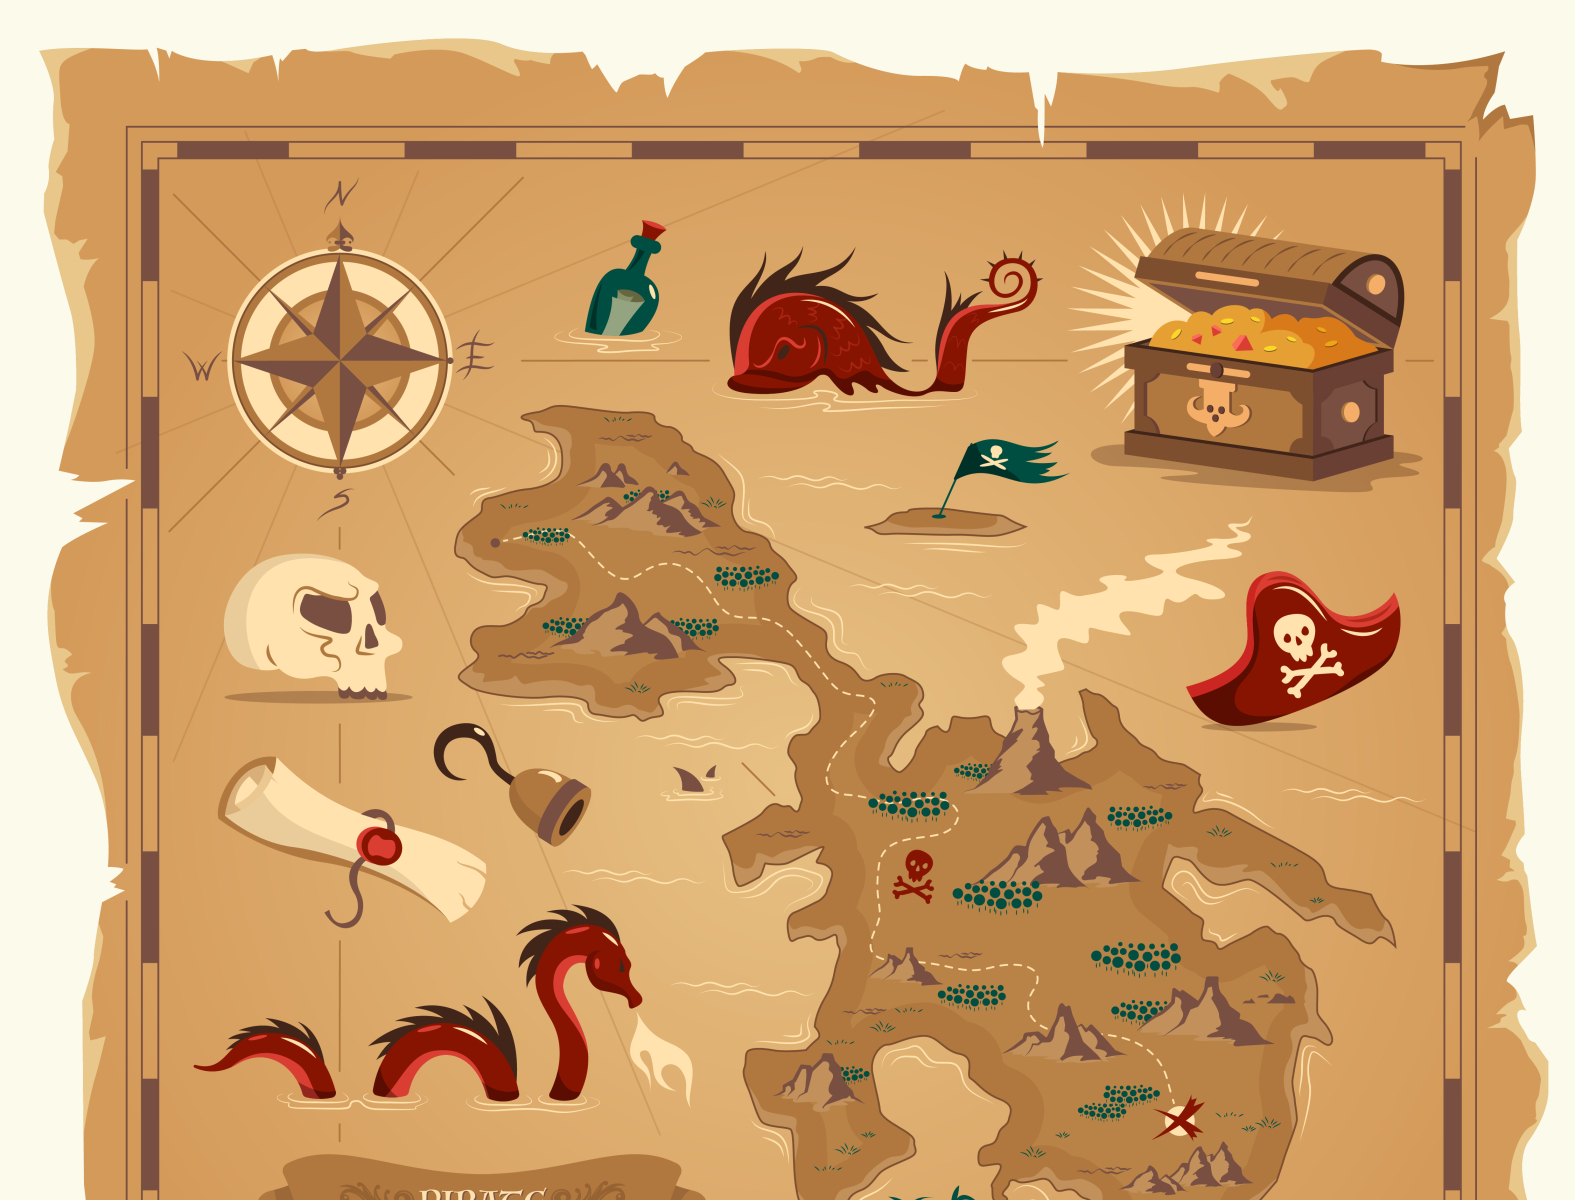 Pirate treasure map by Macrovector on Dribbble